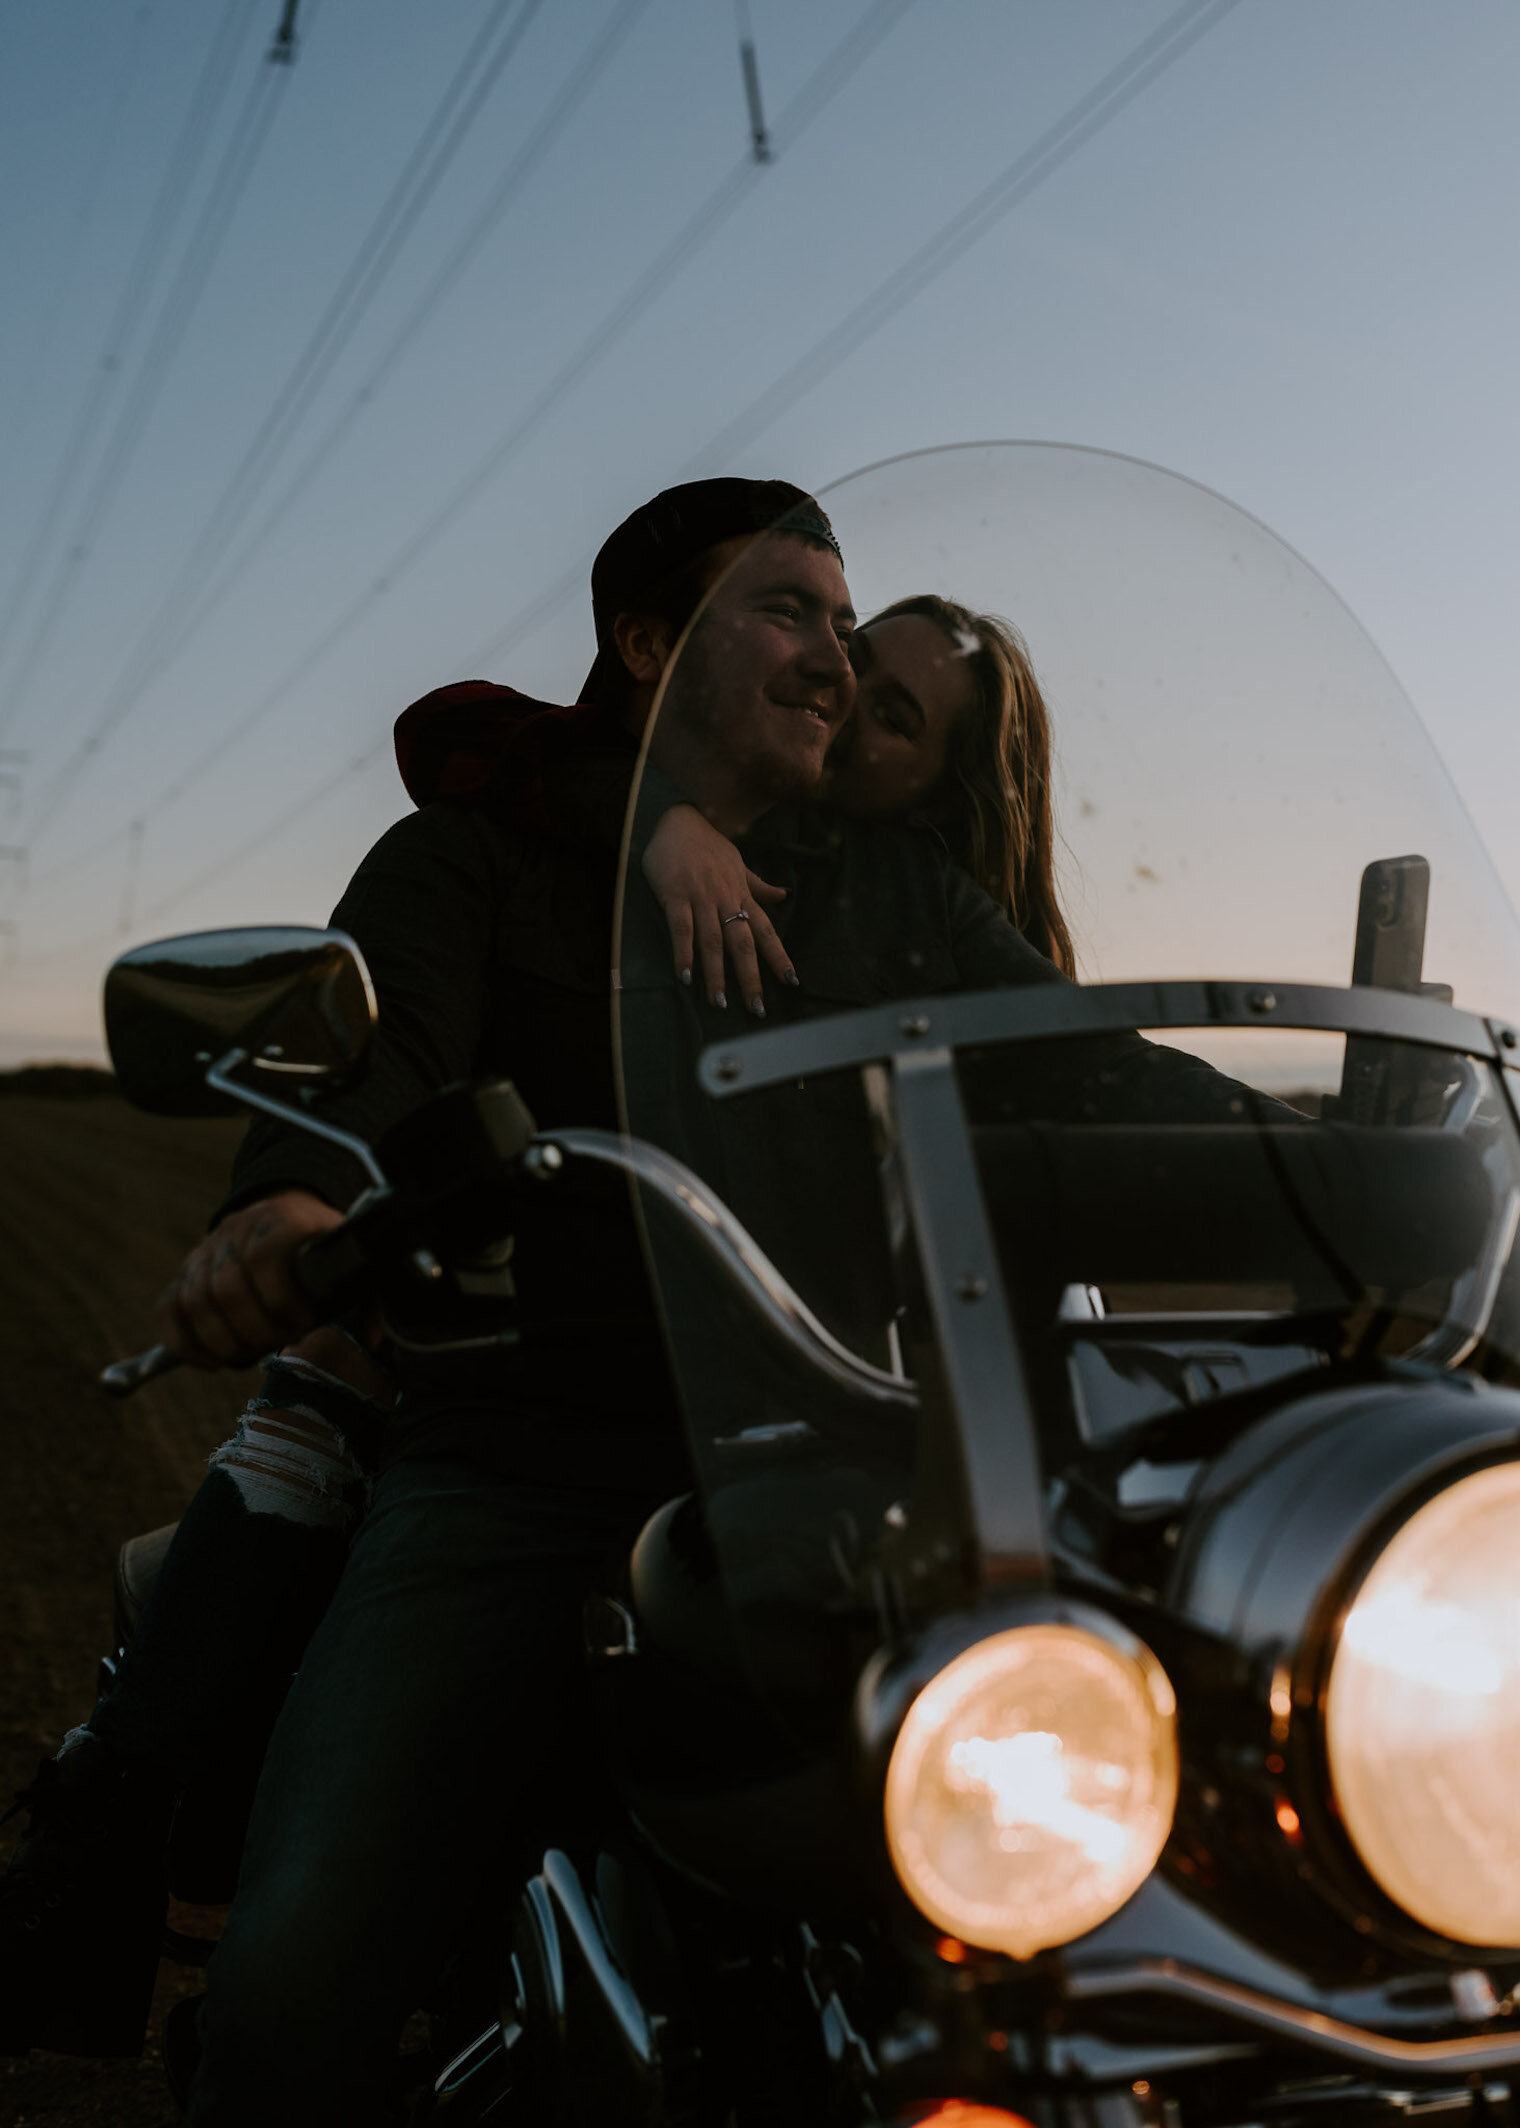 edgy-motorcycle-couples-engagement-session8